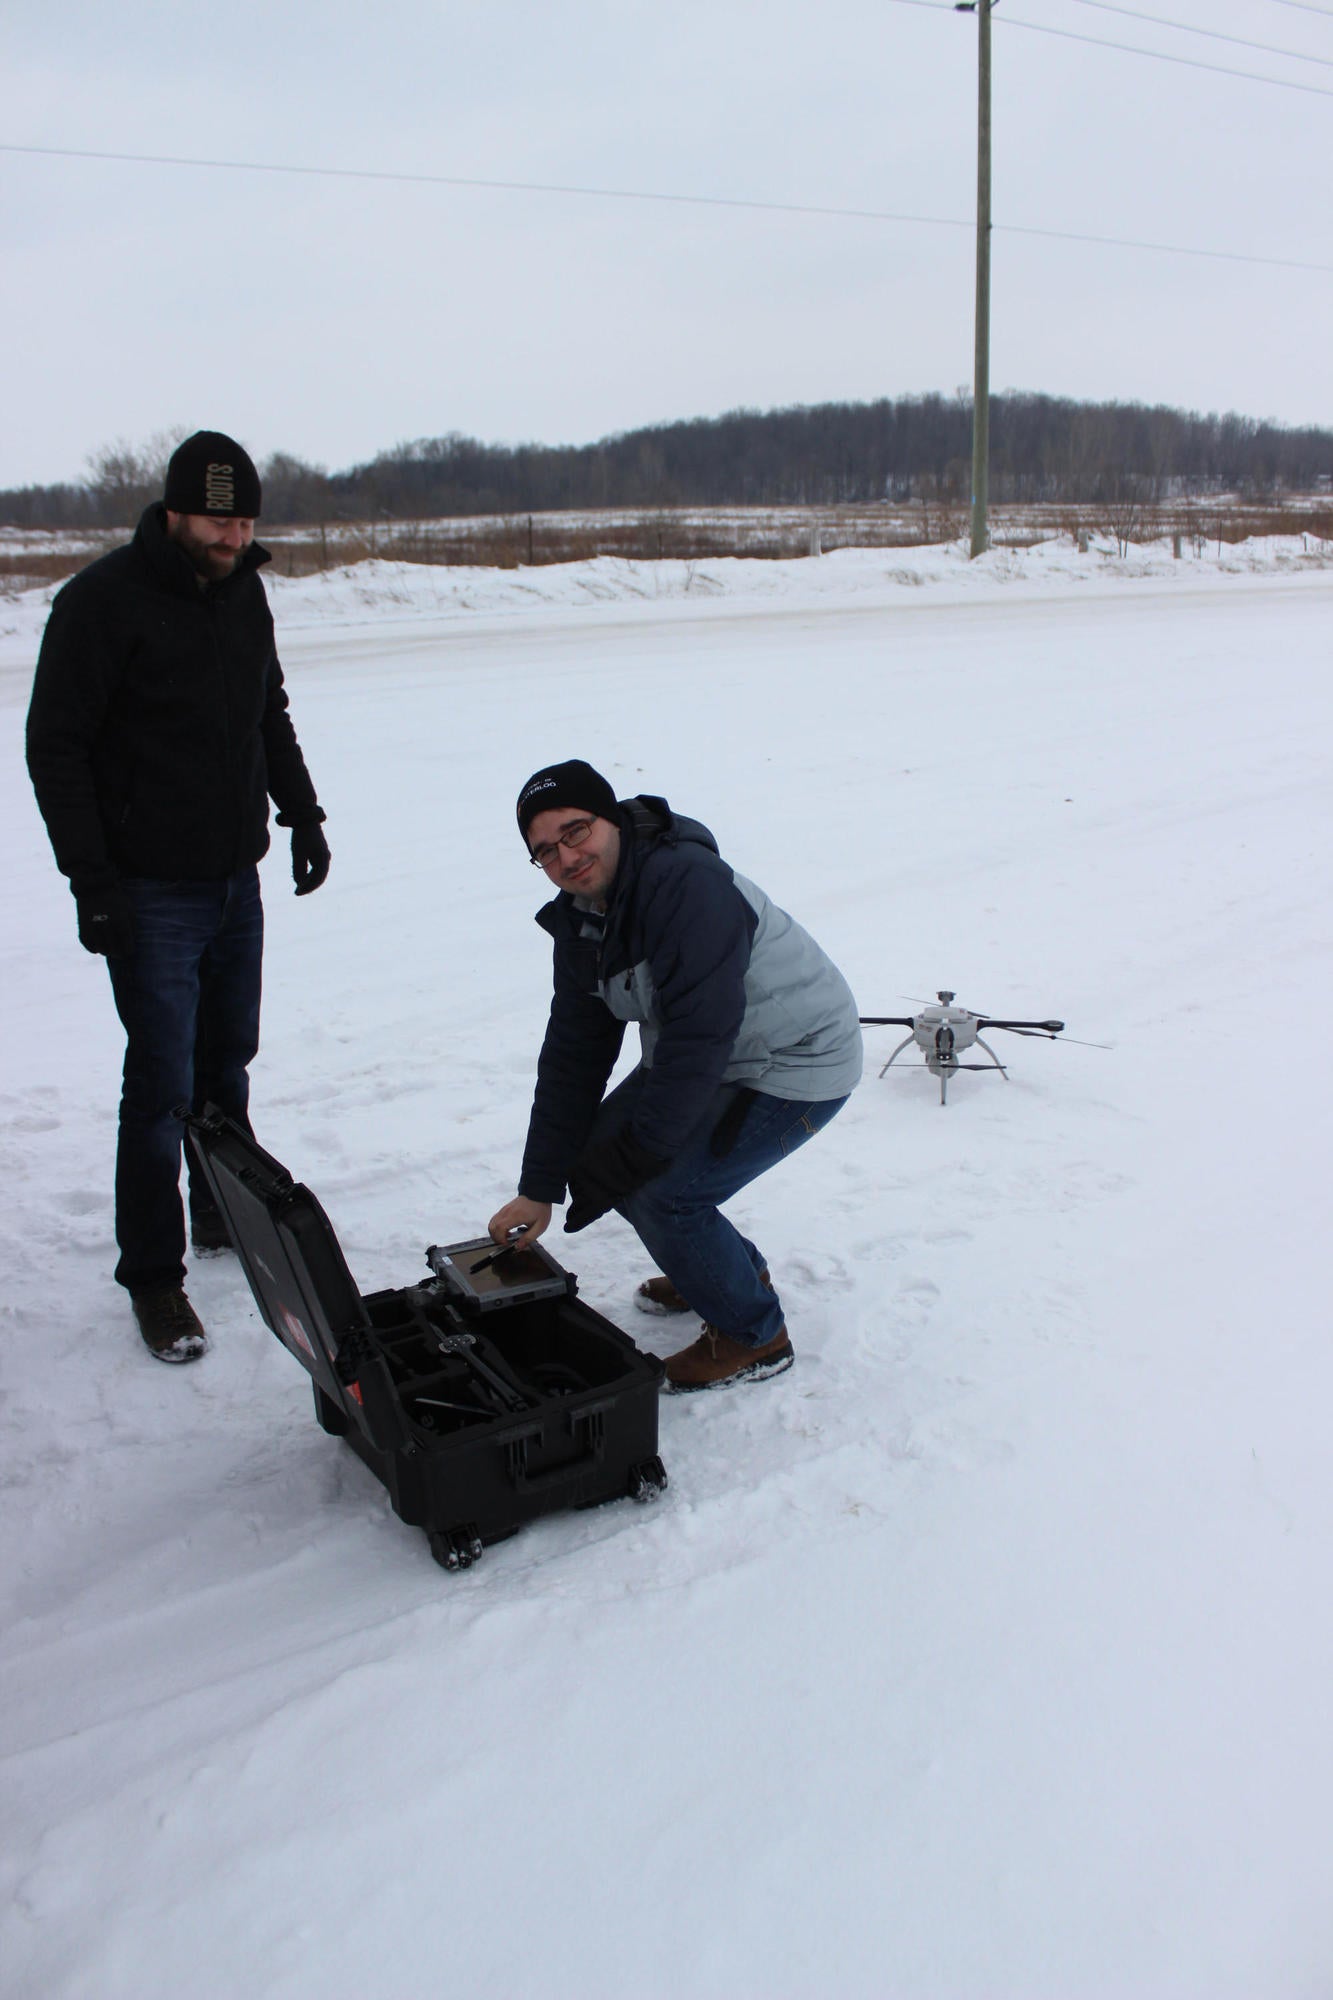 Derek Robinson and Andrei Balulescu unboxing the UAV